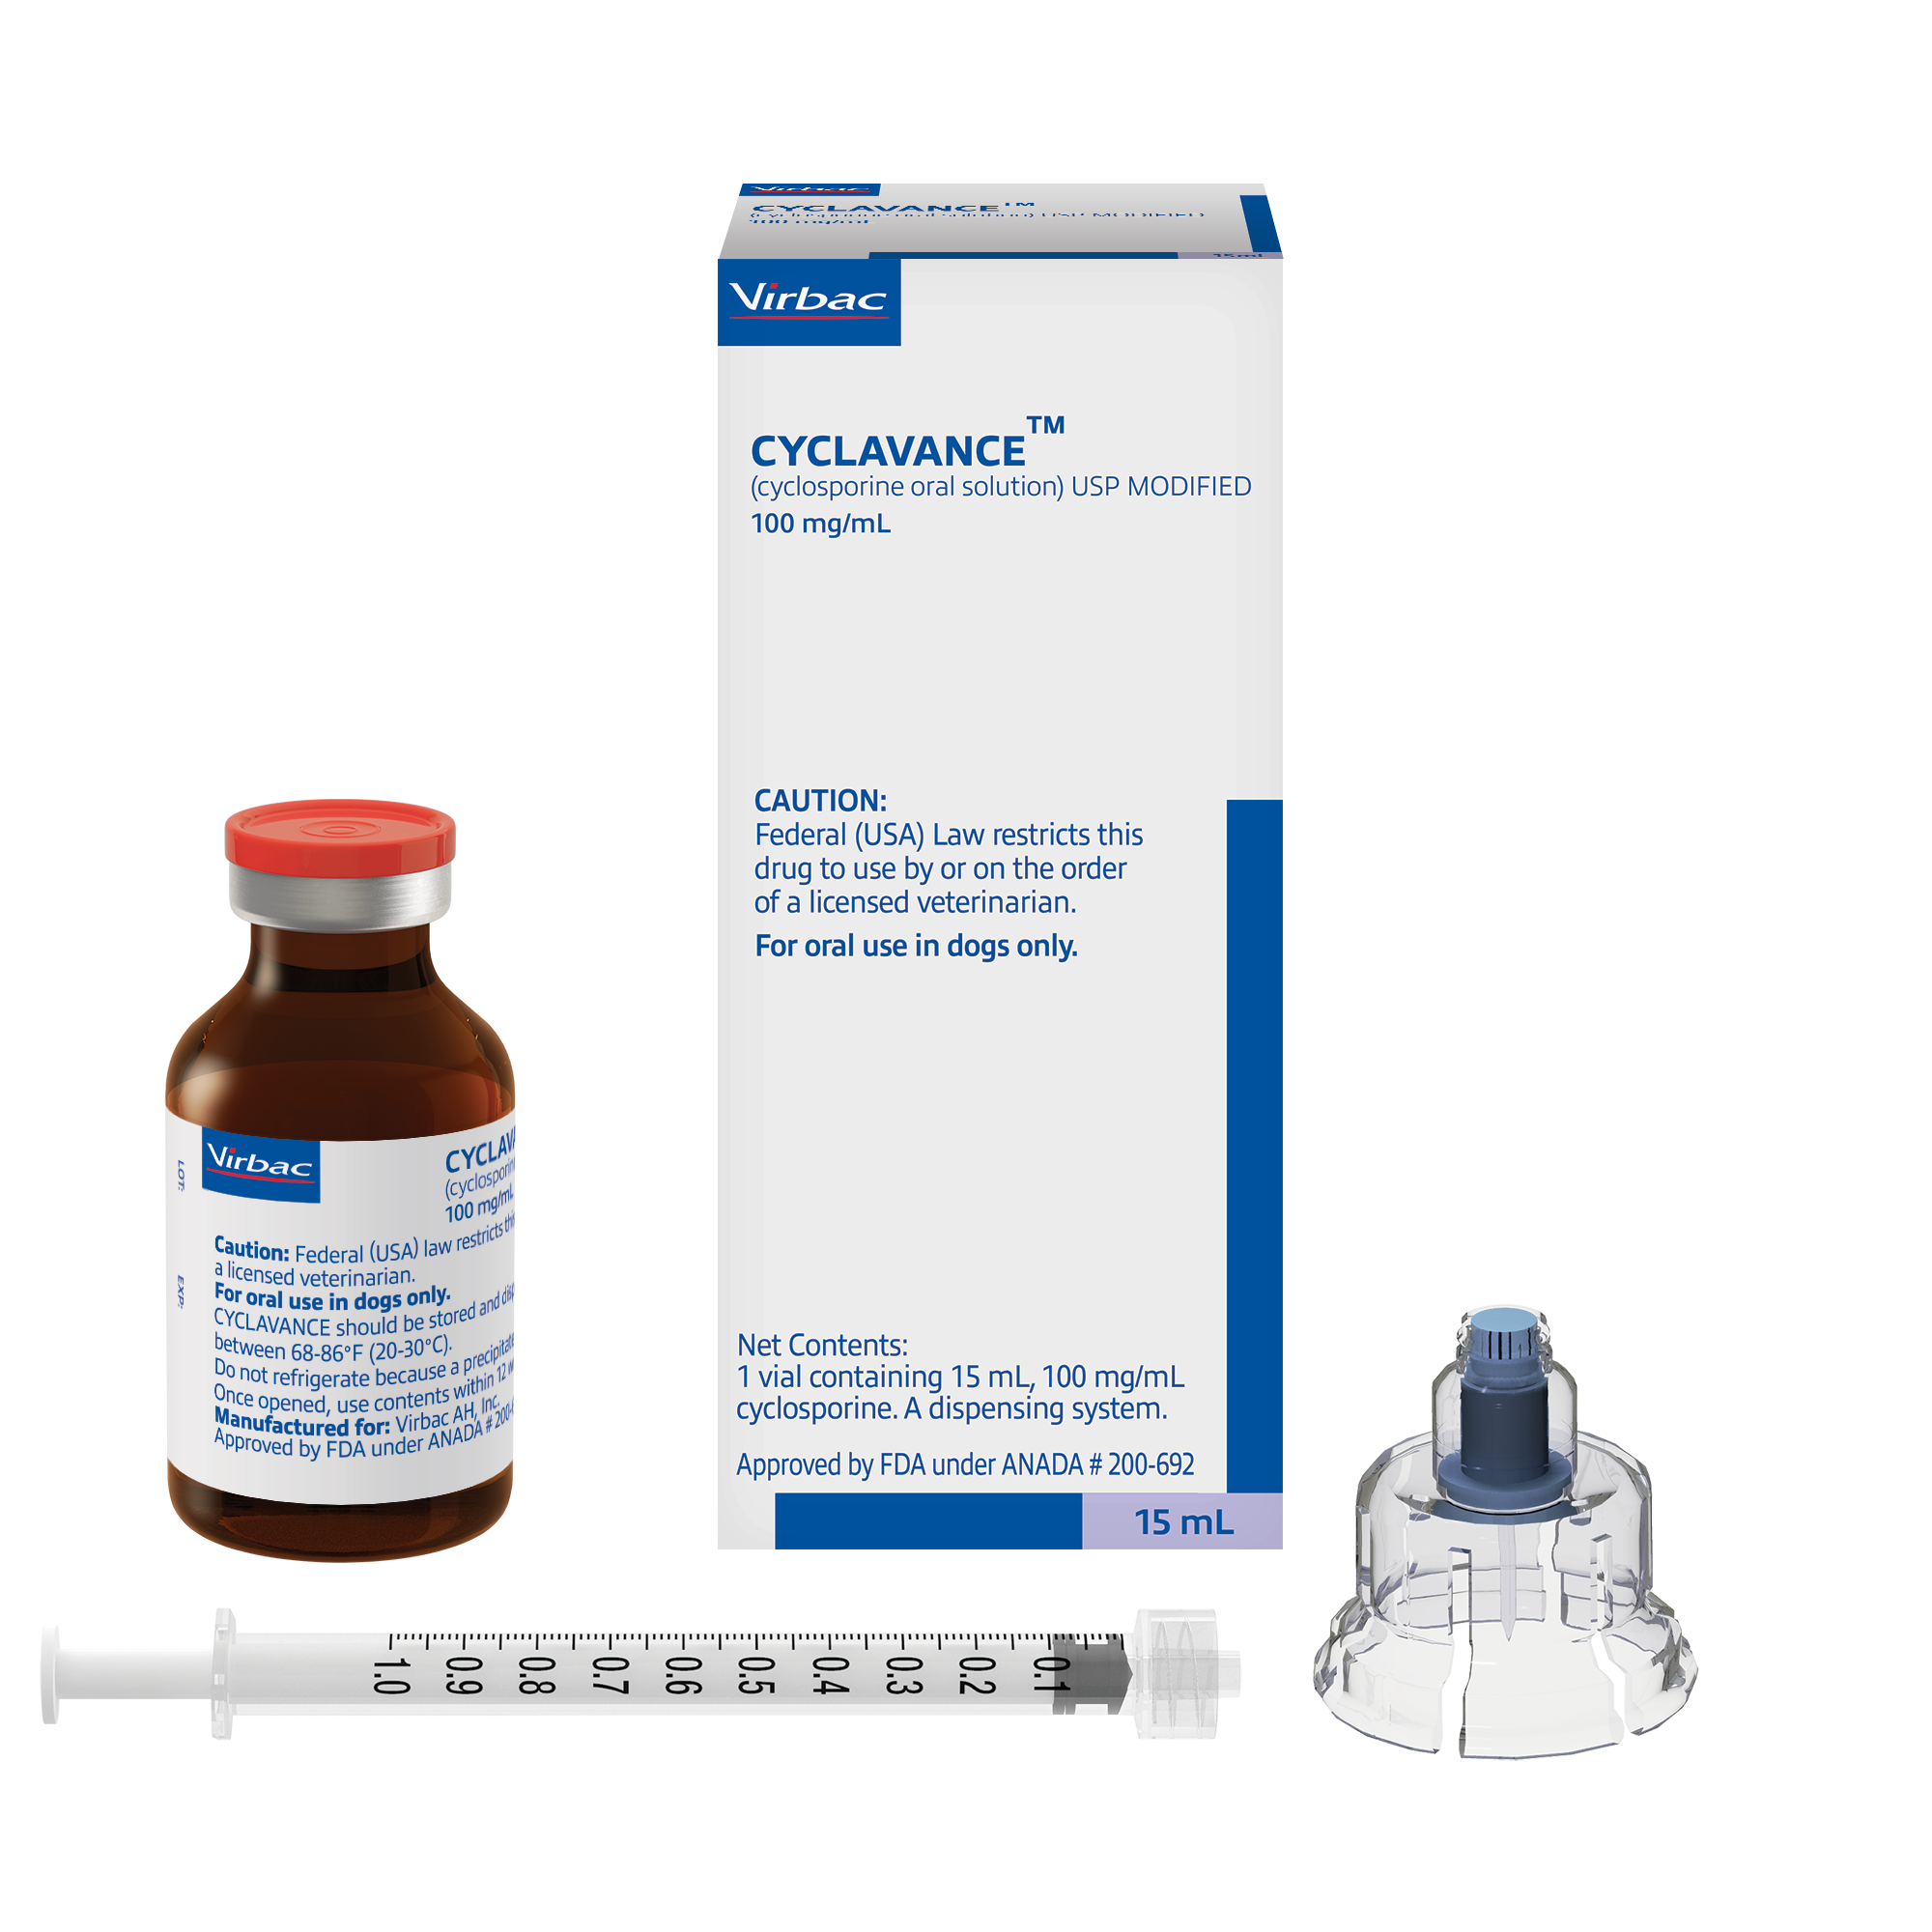 CYCLAVANCE™ (cyclosporine oral solution) USP MODIFIED for canine atopic dermatitis now available  